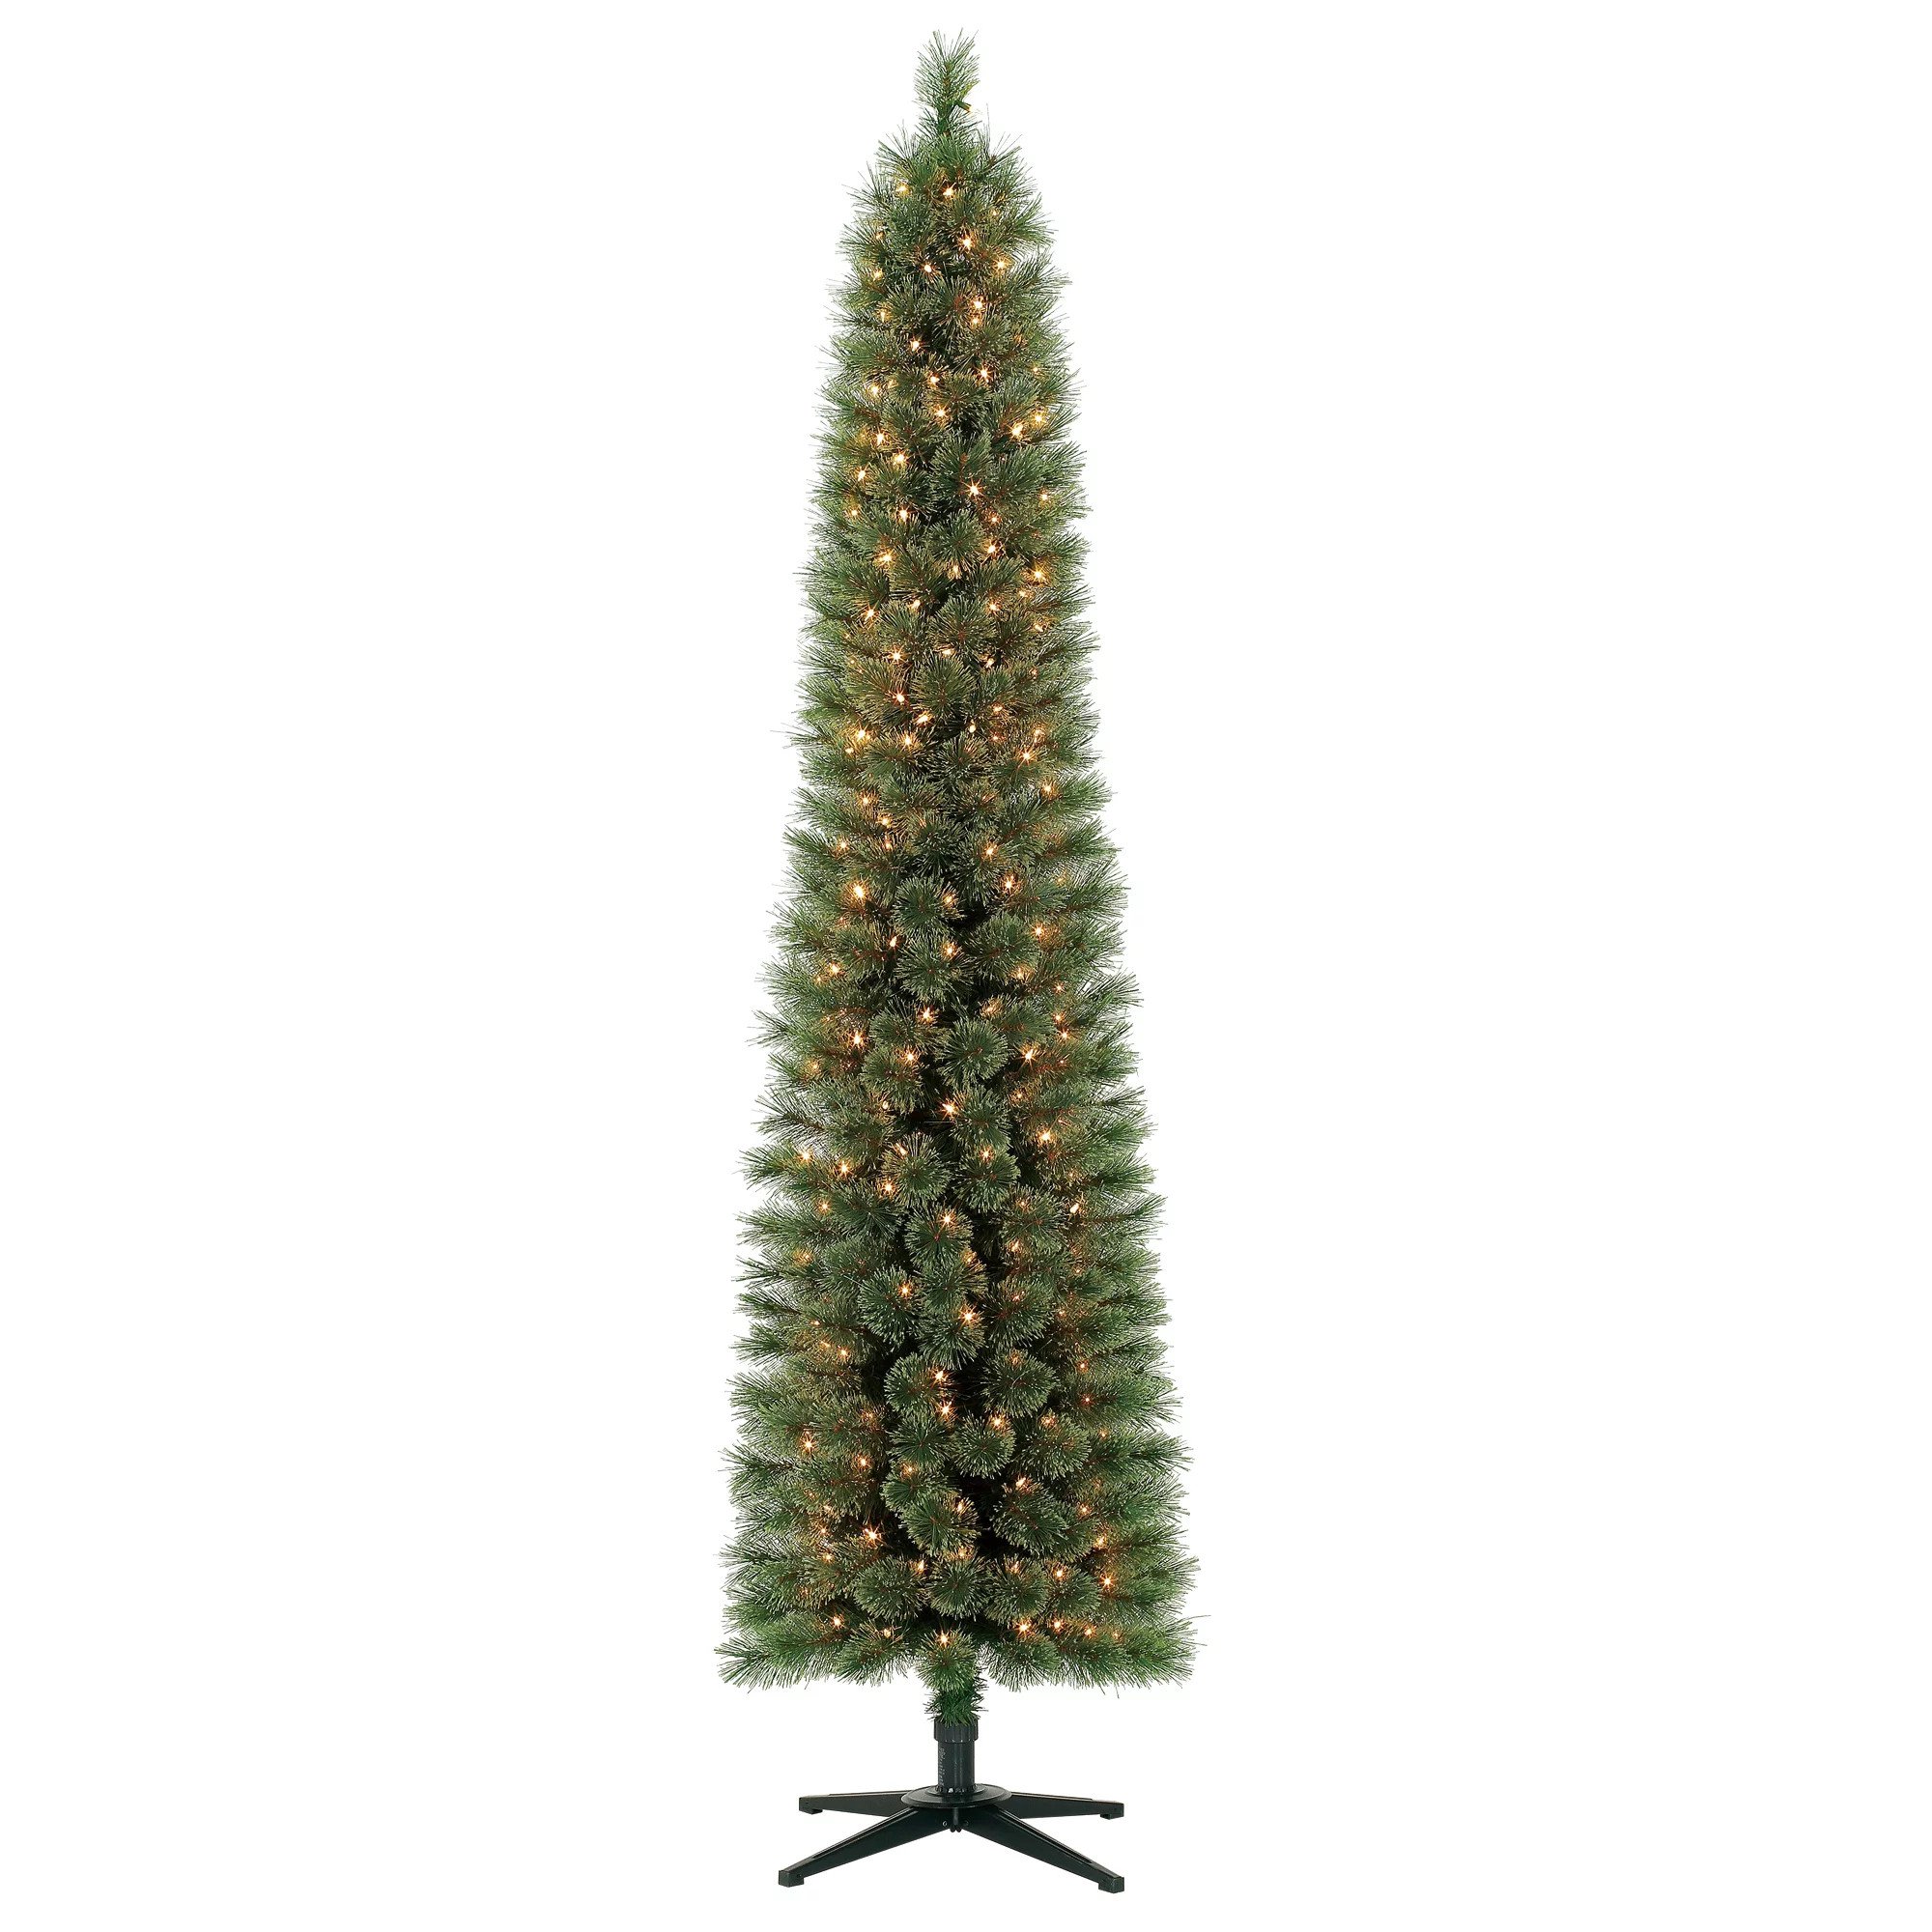 Holiday Time 7ft Pre-Lit Pencil Shelton Cashmere Fir Artificial Christmas Tree with 300 Clear Lig...